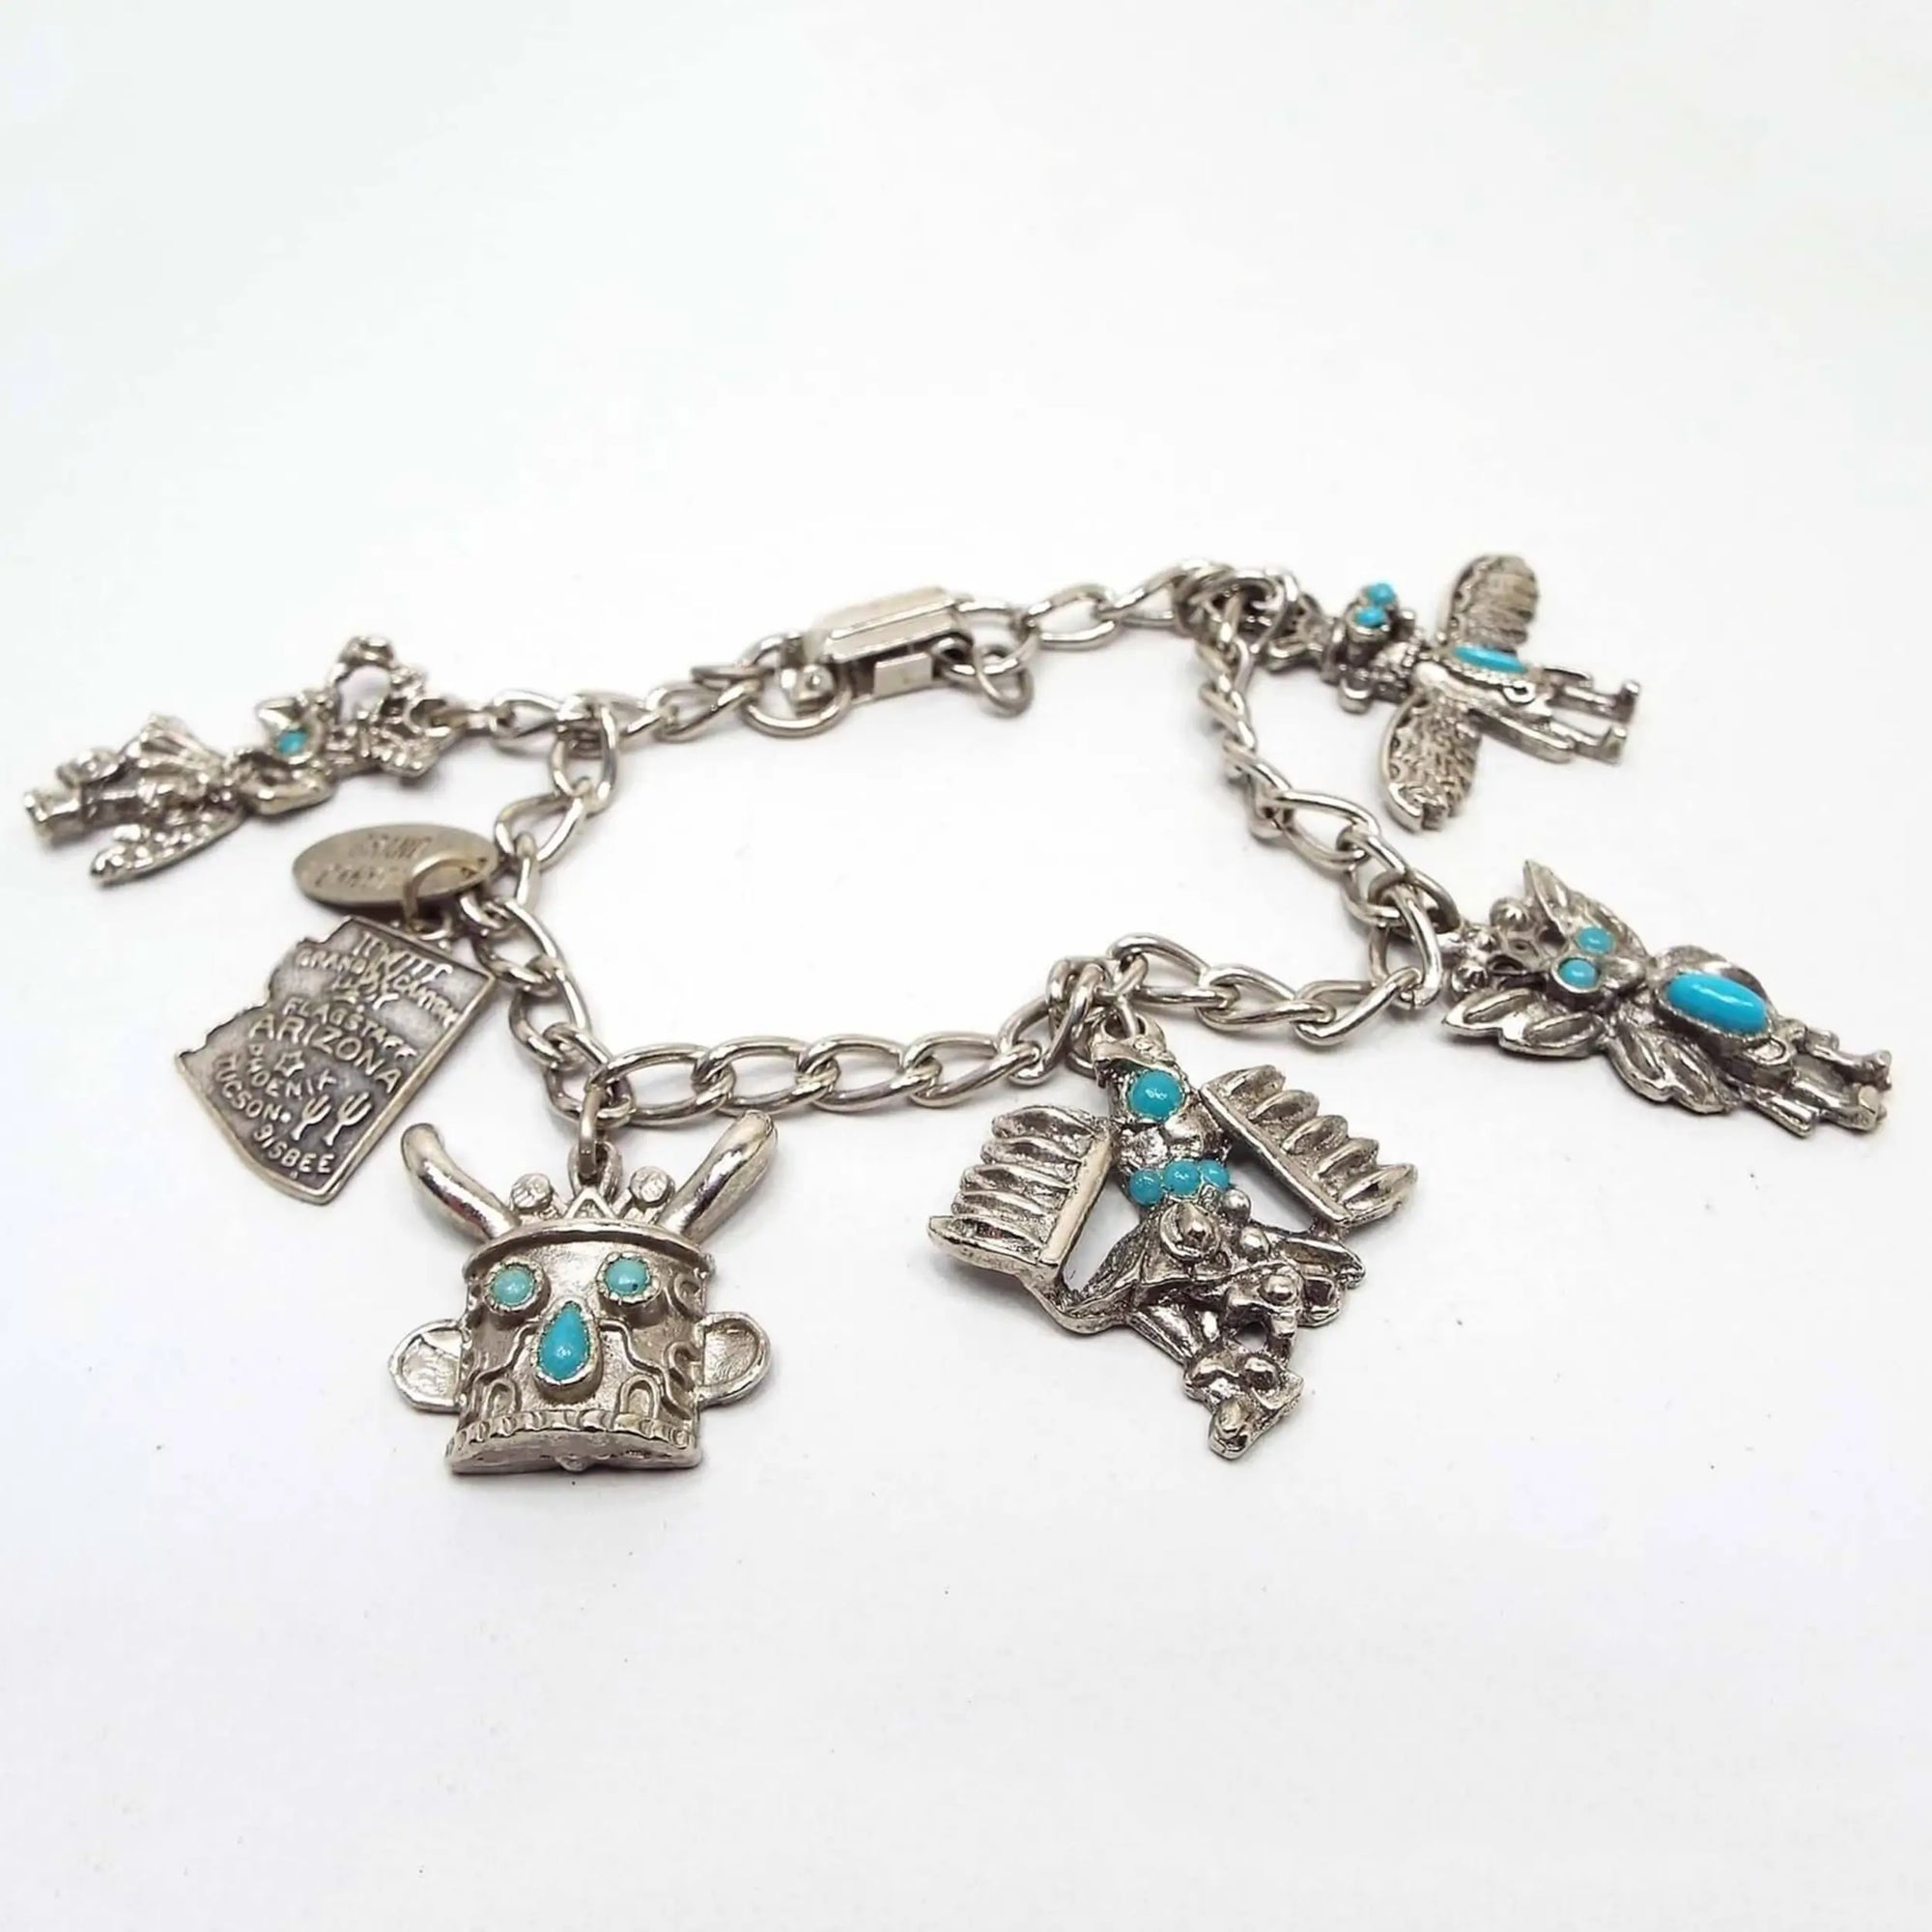 Top view of the 1970's retro vintage Arizona charm bracelet. Bracelet is silver tone in color with a curb link chain and a snap lock clasp on the end. There are 6 charms and a hang tag. The hang tag says Grand Canyon it. The charm shaped like Arizona is sterling silver. The other charms are silver plated Native American Kachina style charms with imitation turquoise cabs.